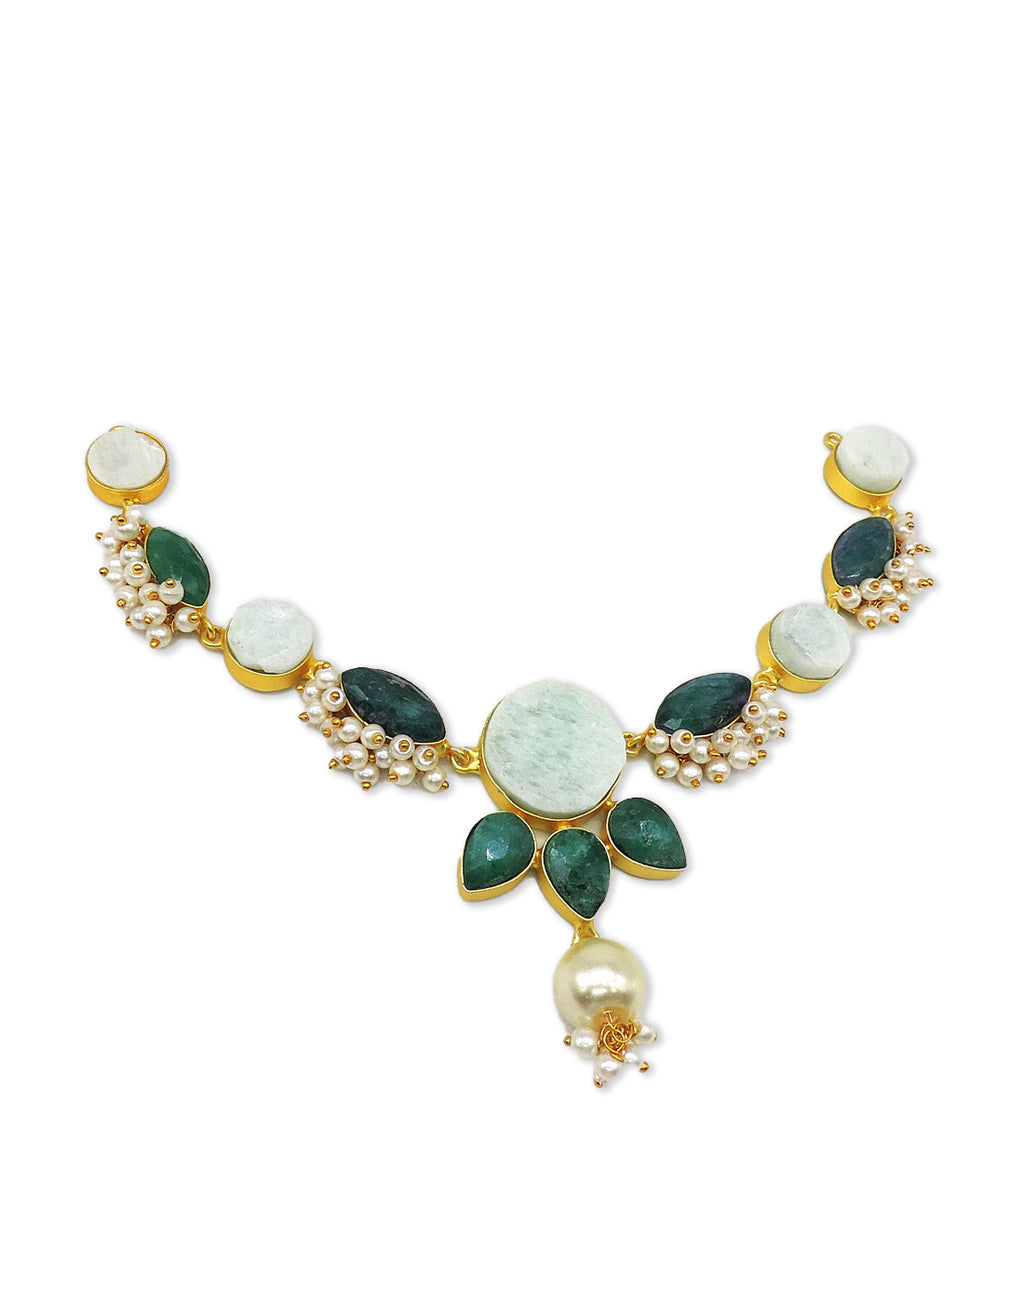 Amazonite & Haathi Flower Necklace - Statement Necklaces - Gold-Plated & Hypoallergenic Jewellery - Made in India - Dubai Jewellery - Dori